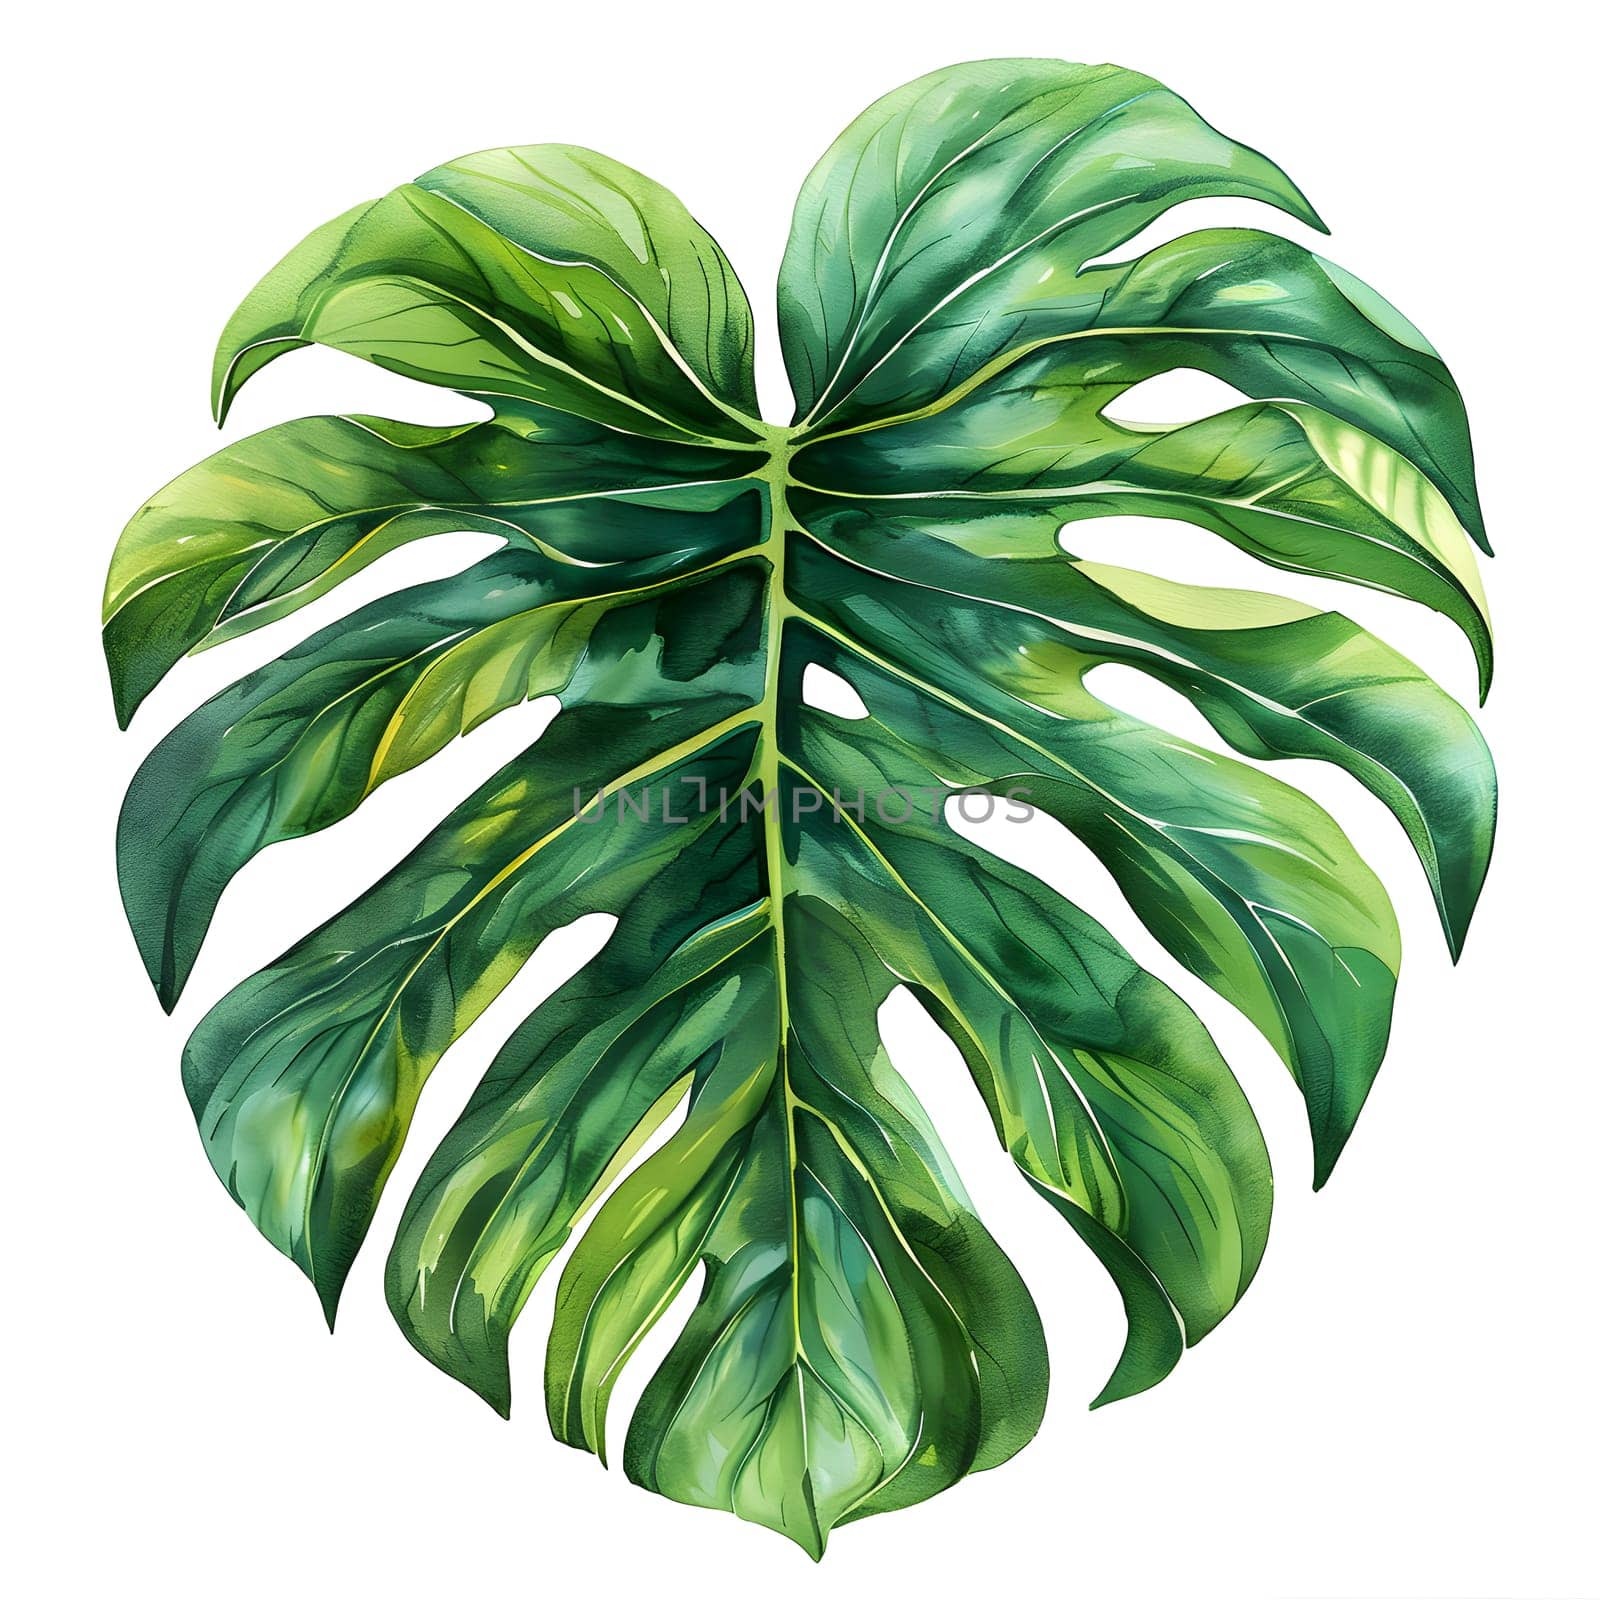 A vibrant green leaf from a tropical palm tree displayed on a clean white background, showcasing the beauty of this evergreen plant